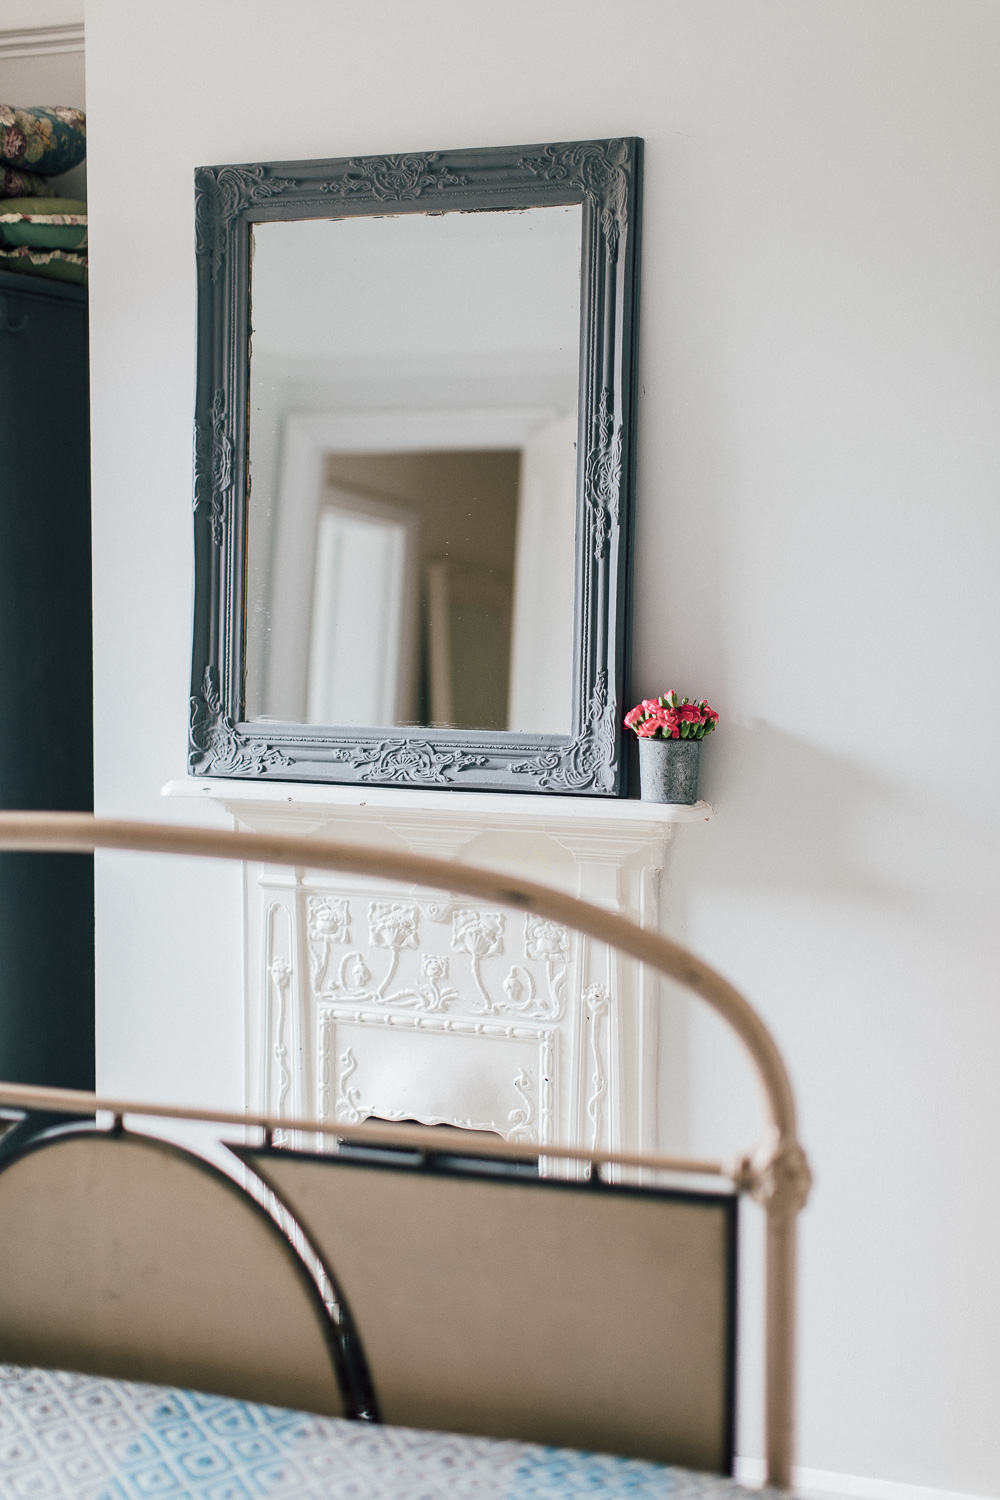 Mirror propped on antique fireplace